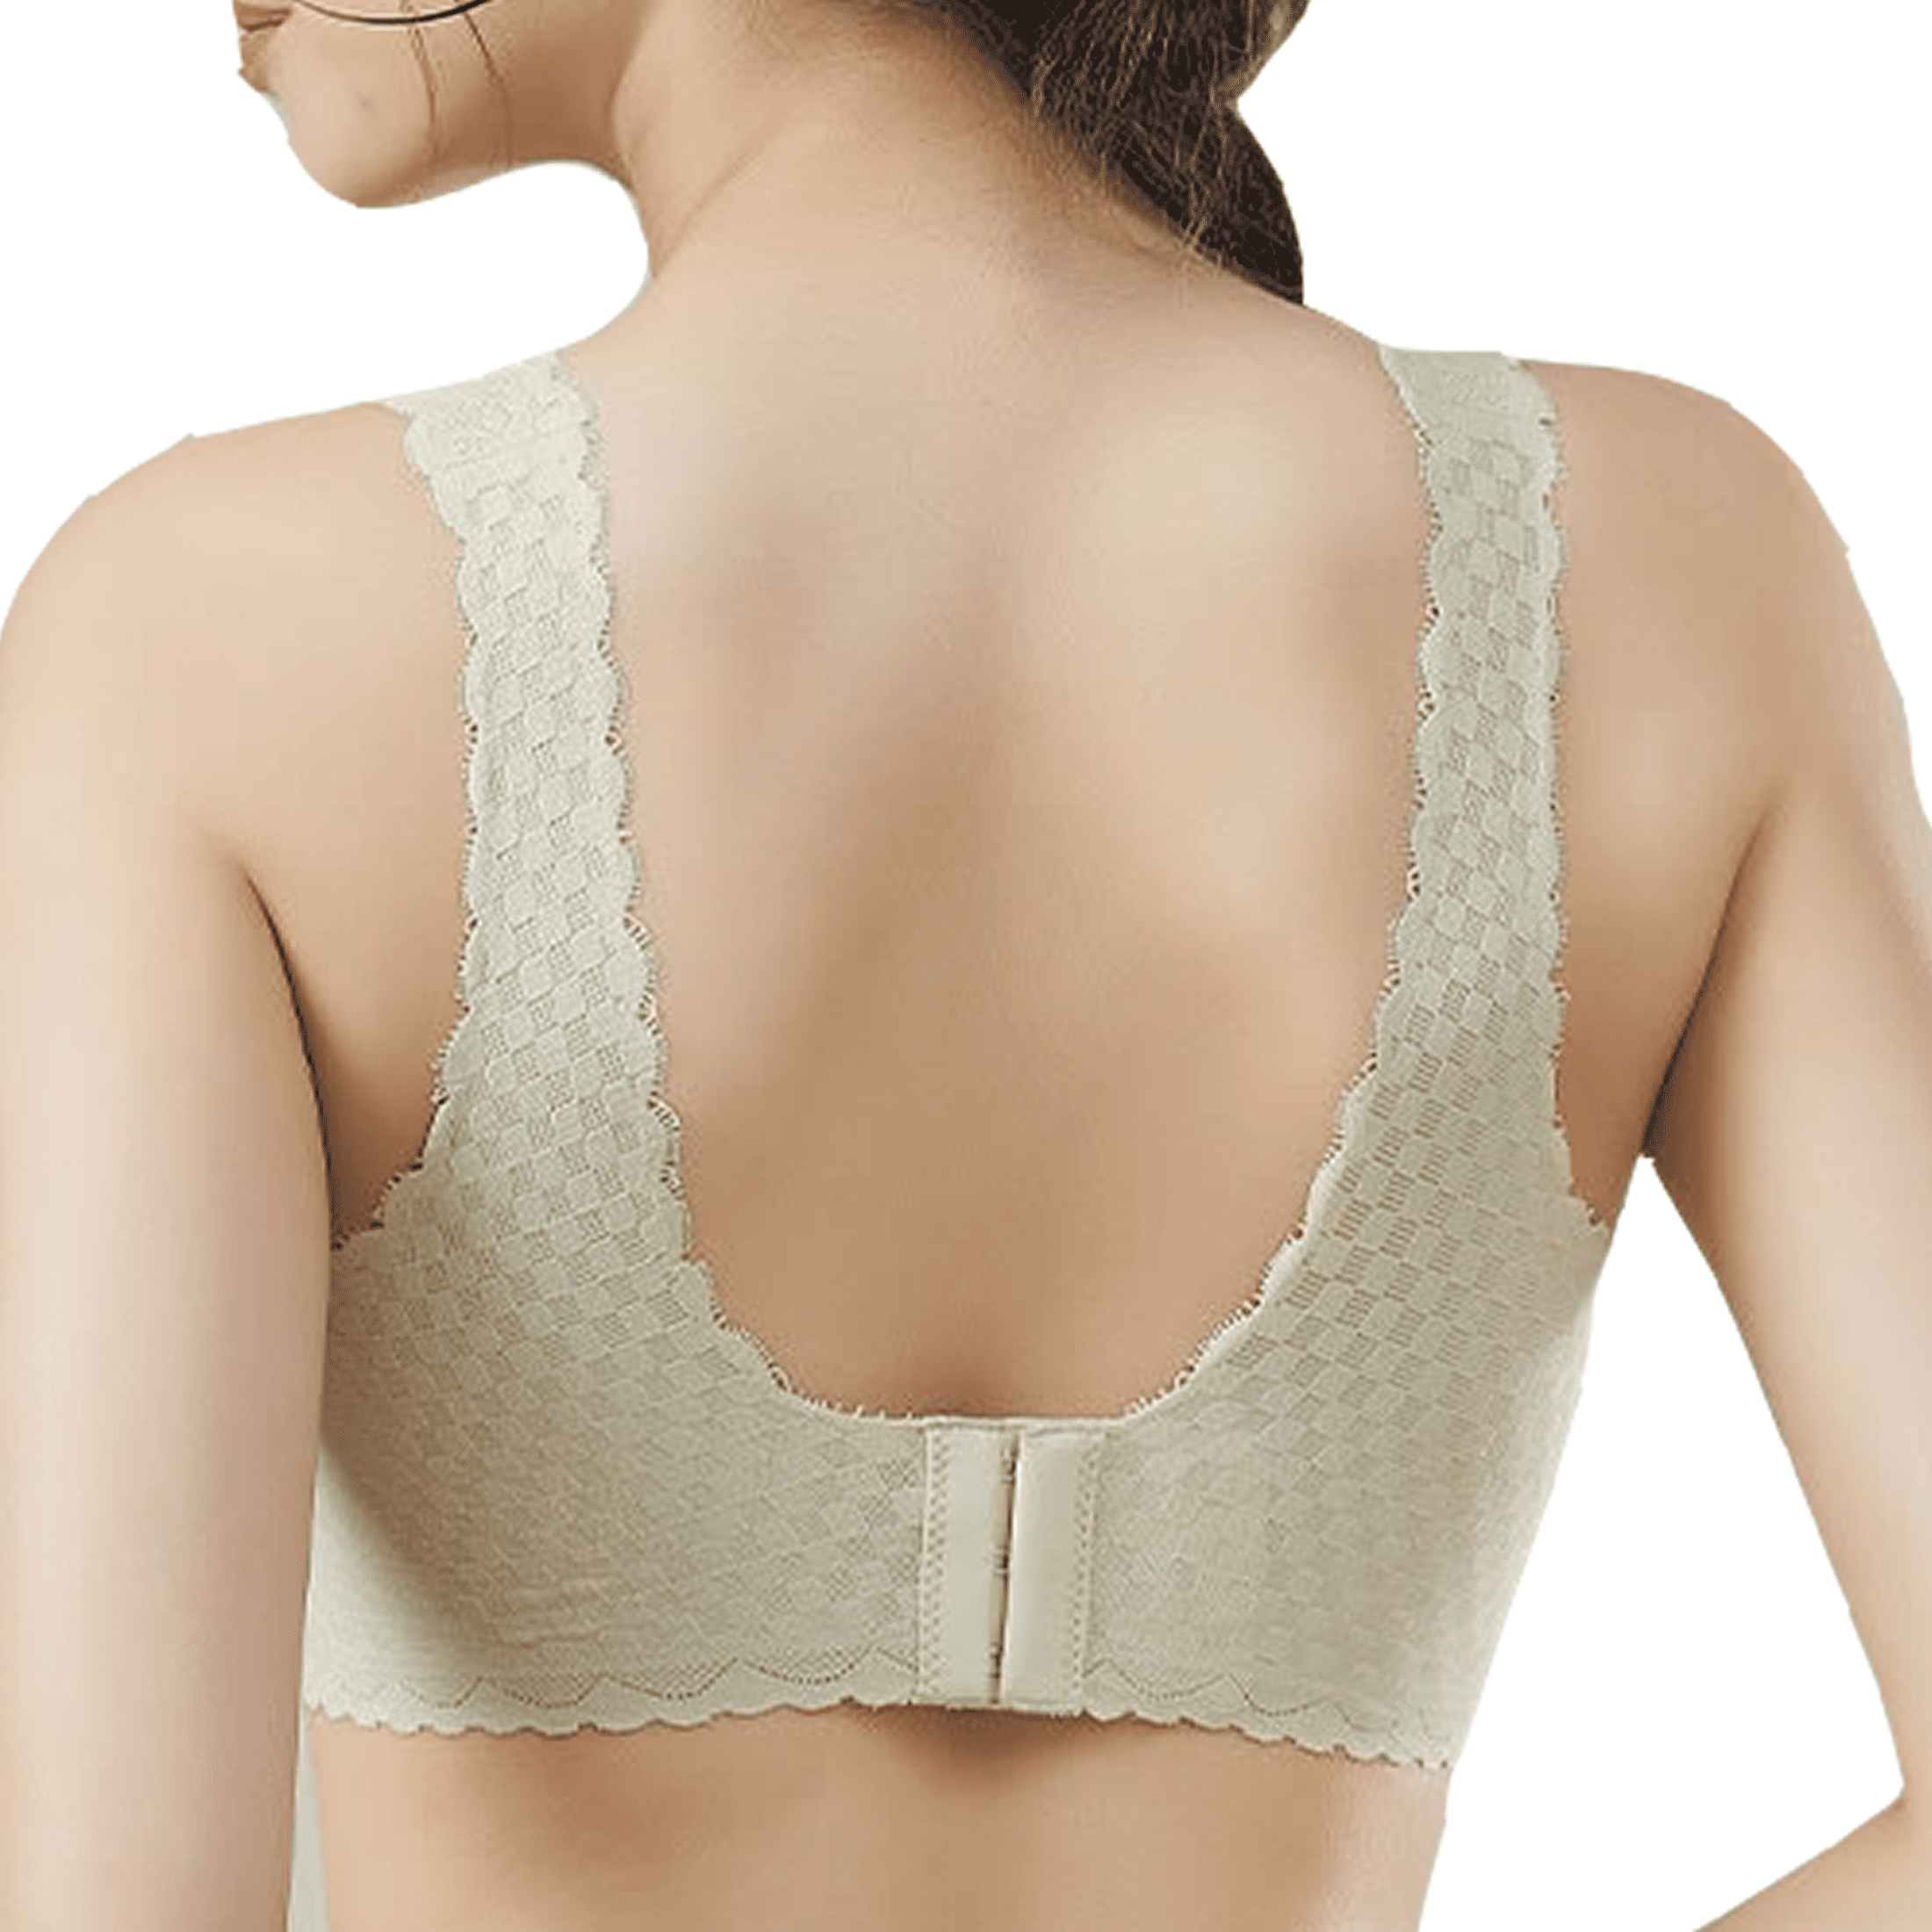 BIMEI Women's Sports Bra Wirefree Zipper Front Mastectomy Bra Comfort Pocket  Bra Seamless with Removable Paddings9901 (S, Gray Cross Style) at   Women's Clothing store